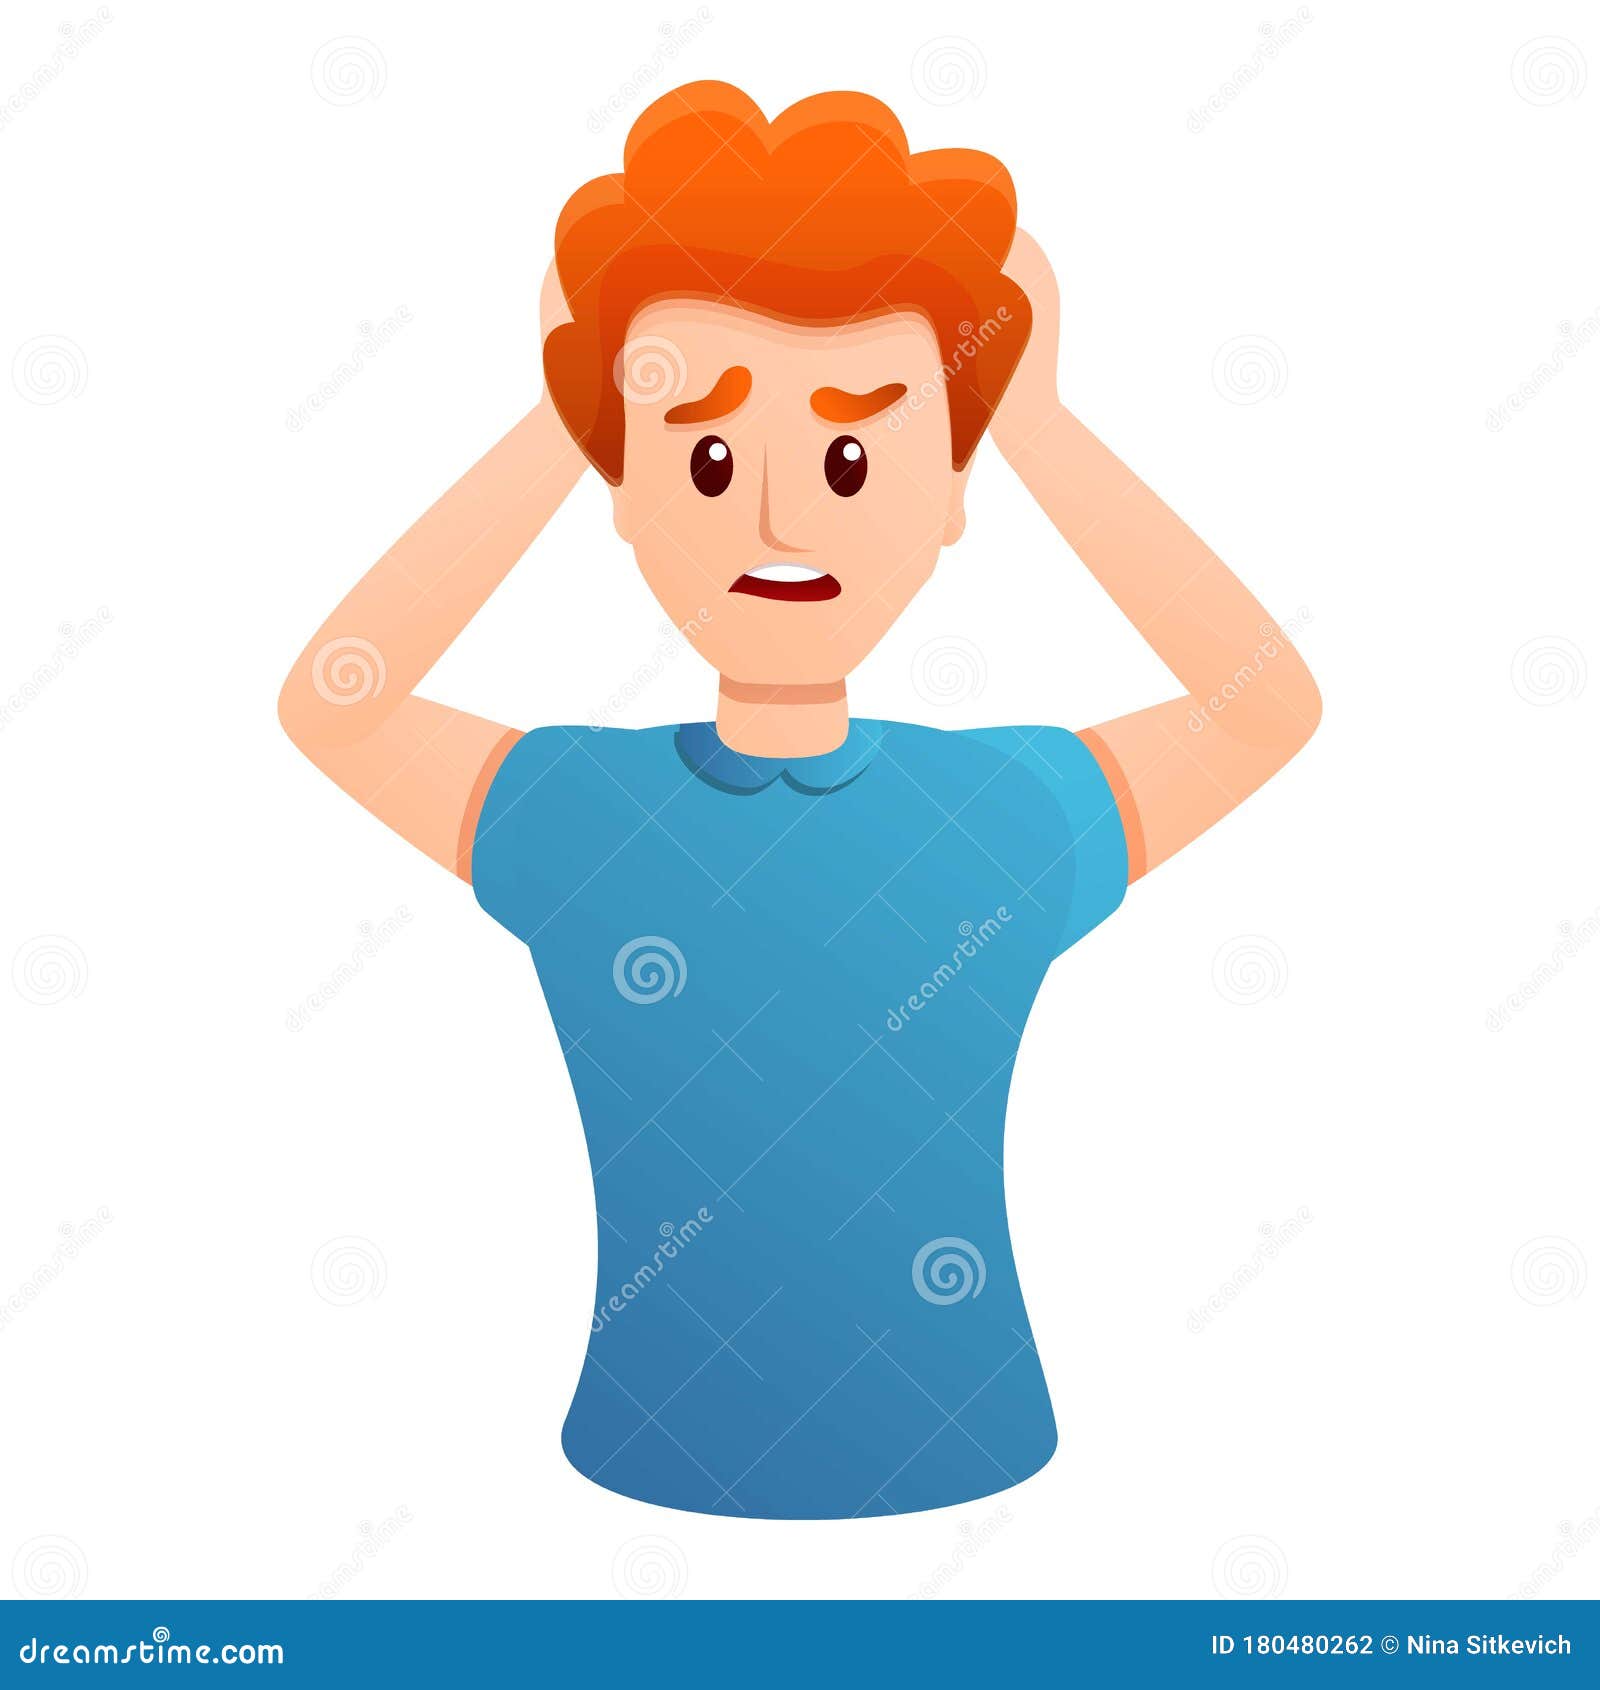 Tension Stress Icon Cartoon Style Stock Vector Illustration Of Silhouette Person